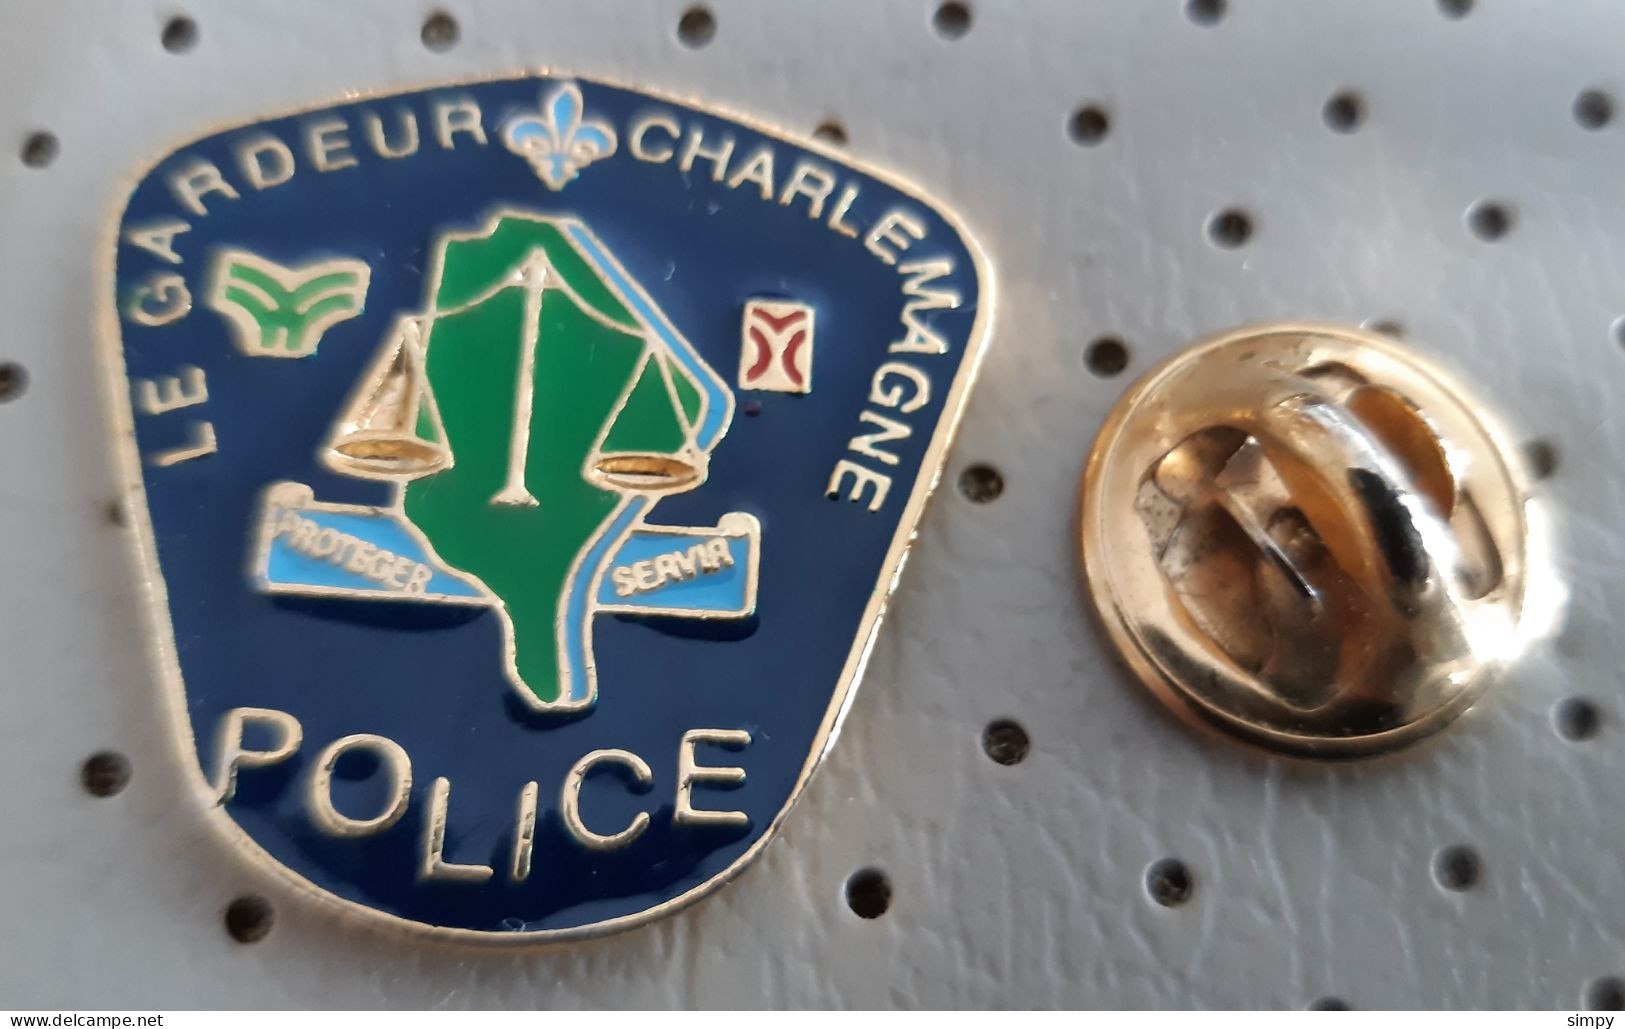 Police Le Gardeur Charlemagne Canada Pin - Police